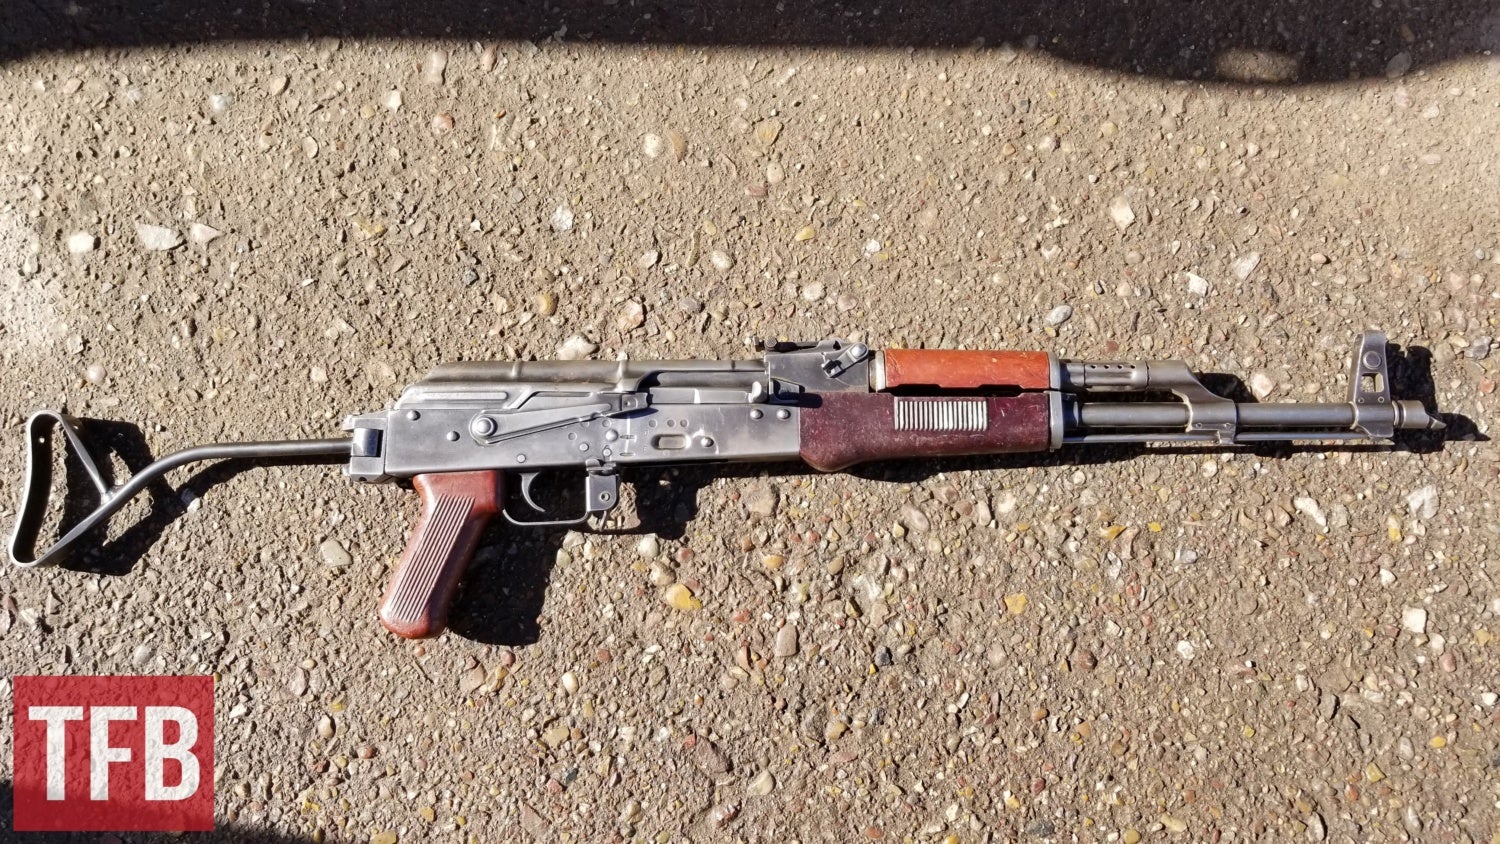 Typical MPi-KMS, with replaced pistol grip